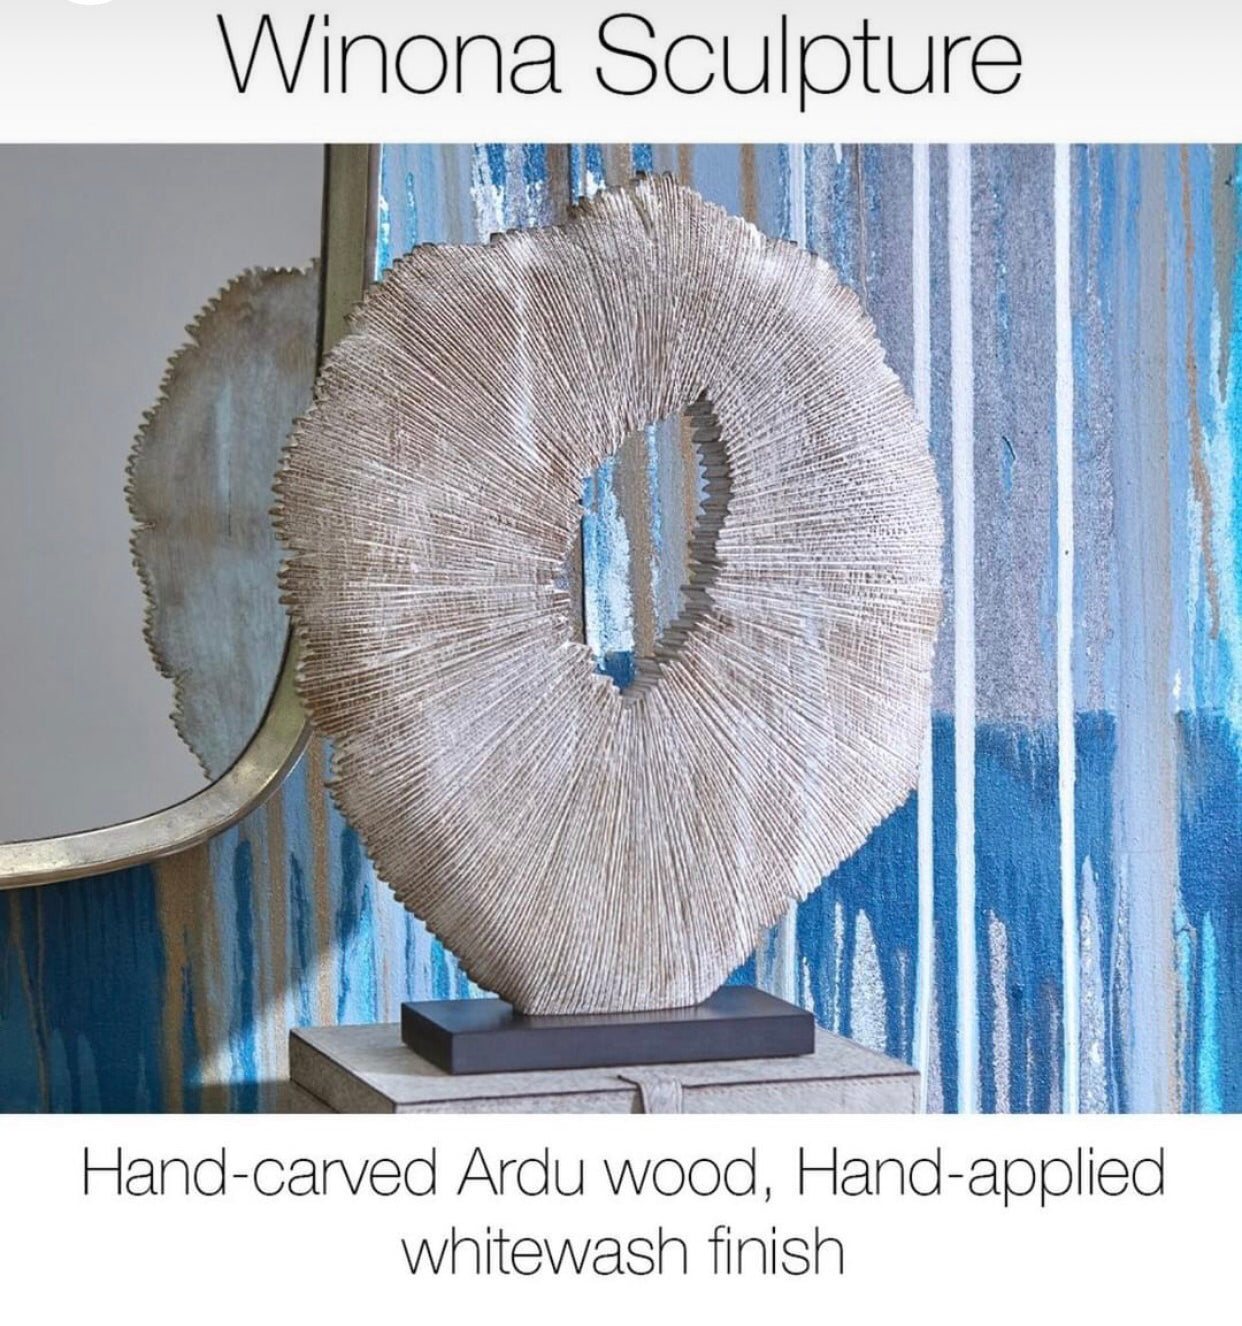 The Winona sculpture is made from Ardu wood and bears the natural shape of a tree ring. The texture etched into the soft, white cream wood gives this piece of art a light and sophisticated energy. The live edges throughout take the imagination to a place of peace, comfort, and wholeness.  Artisan Produced: This product, or portions of this product have been hand crafted by artisans. Each piece is unique and can vary in finish, tone, texture and color.  ETA: 03/24/2023  Dimensions: L 14.5 X W 4 X H 19.5  Wei